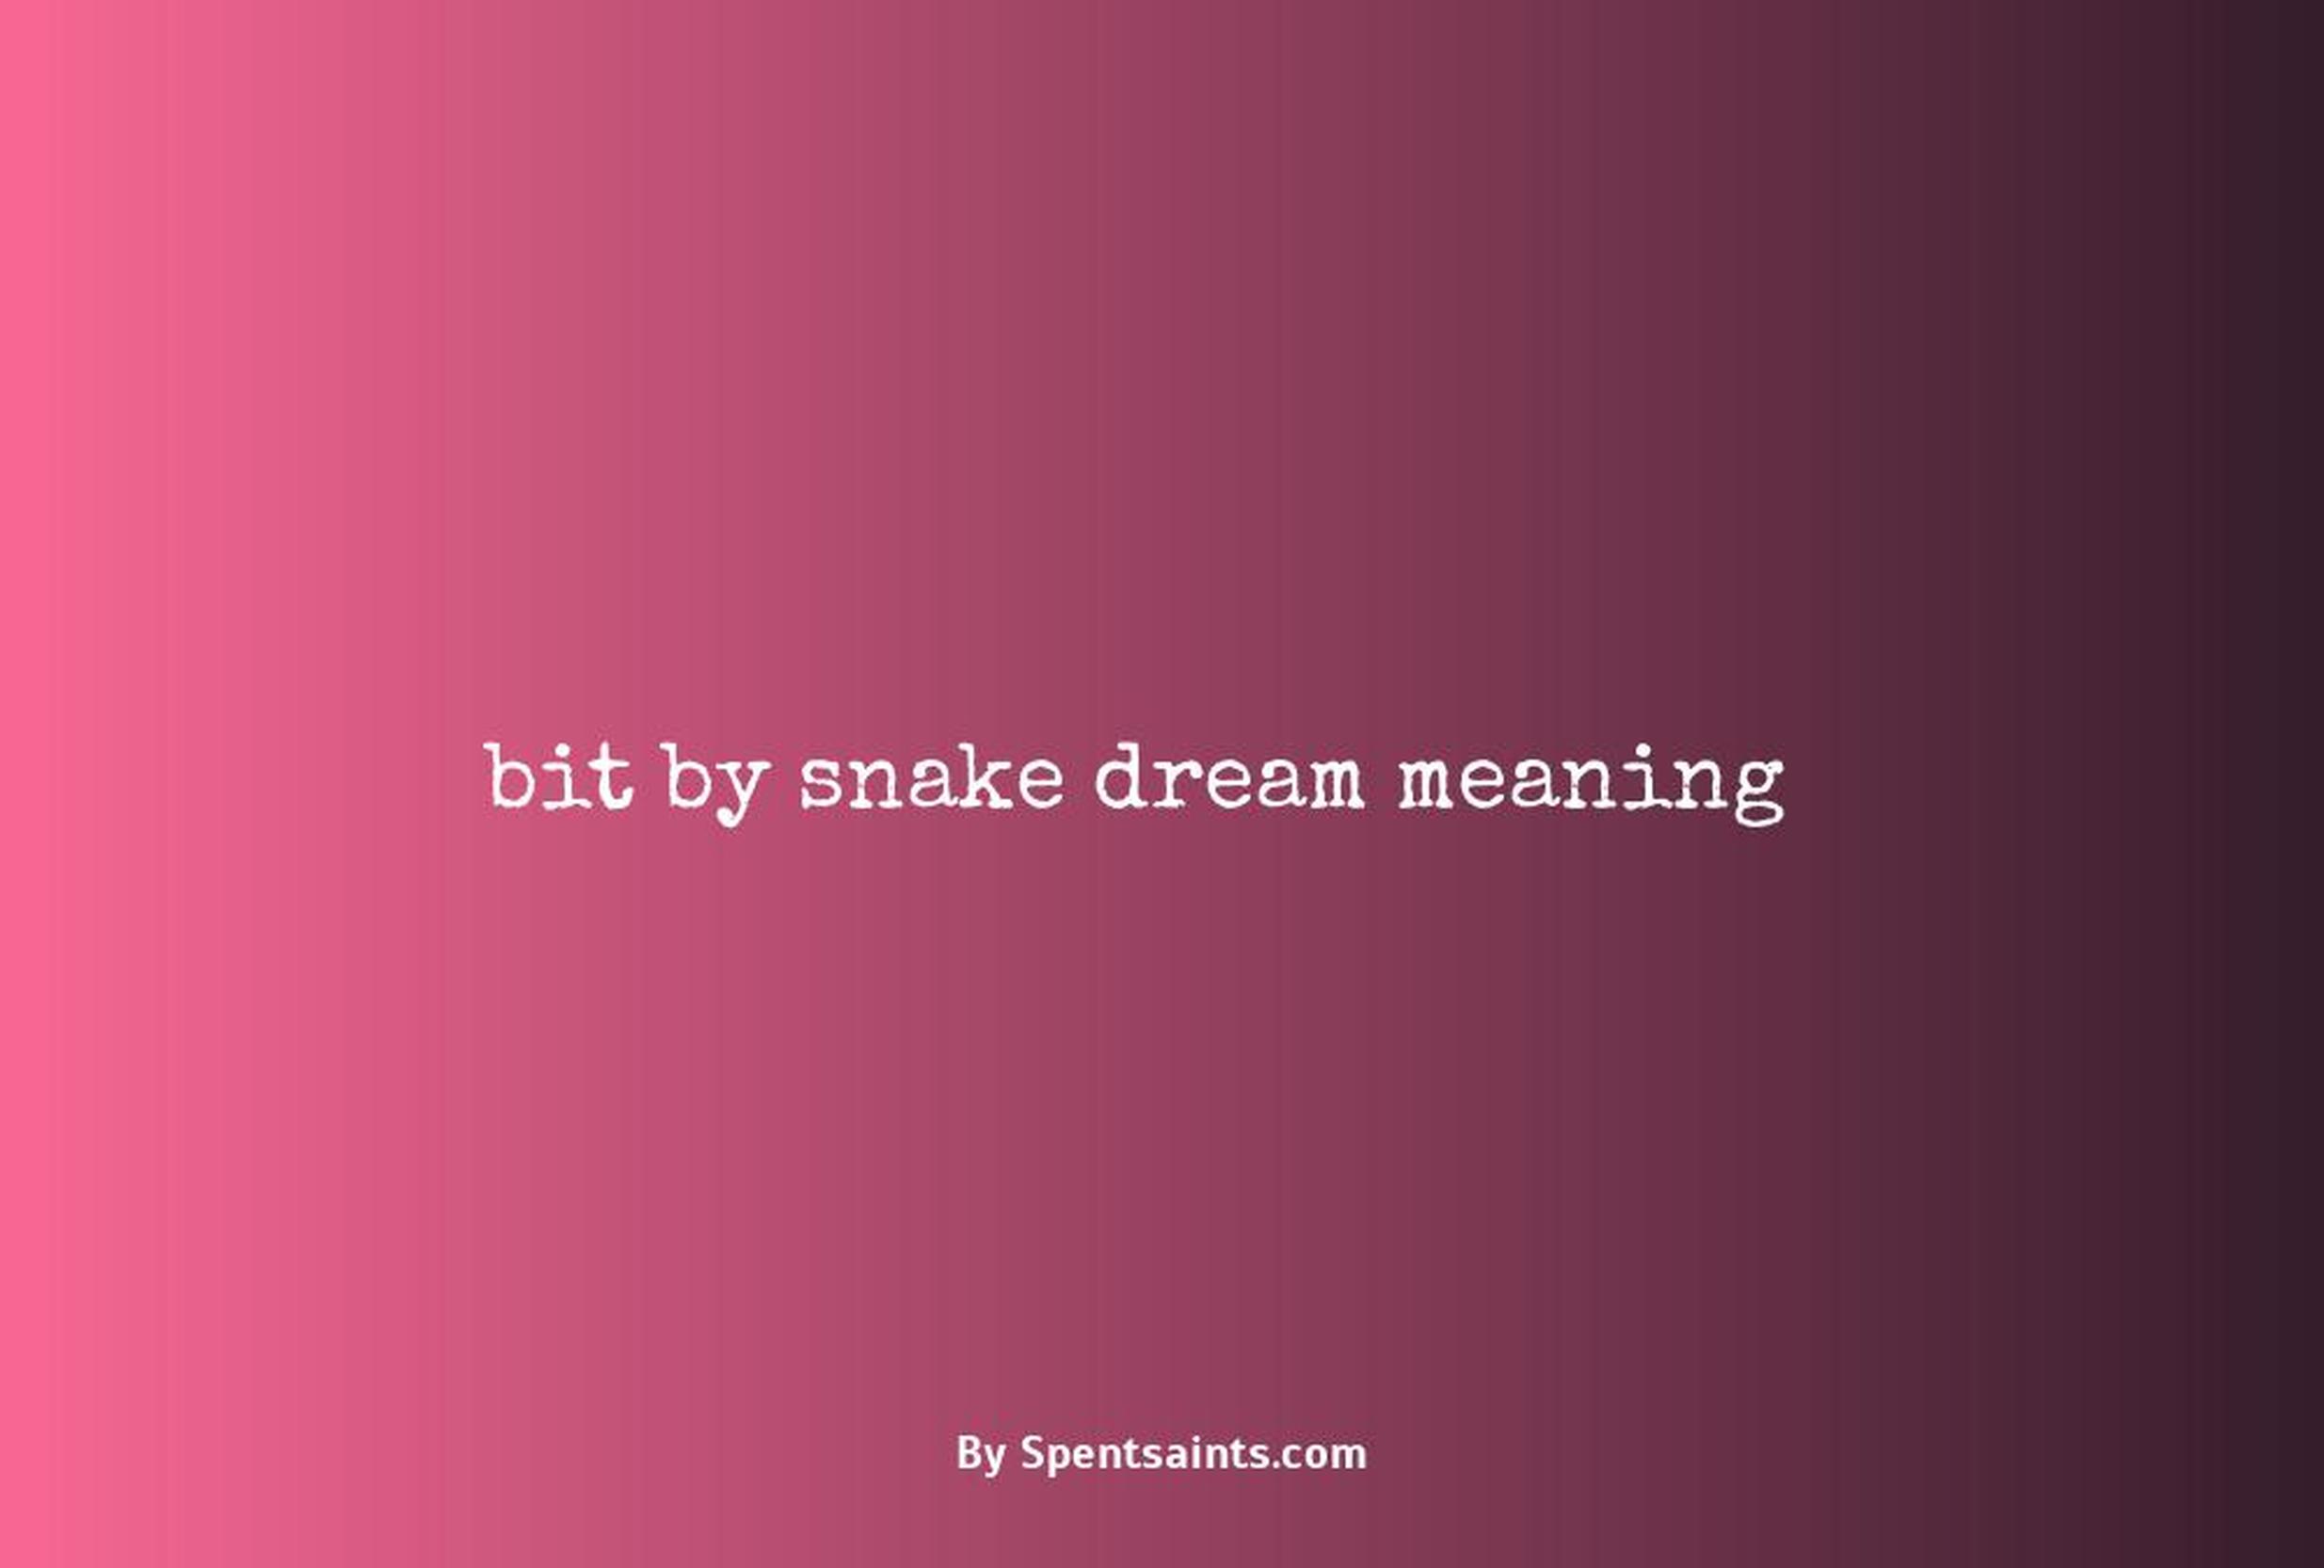 bit by snake dream meaning